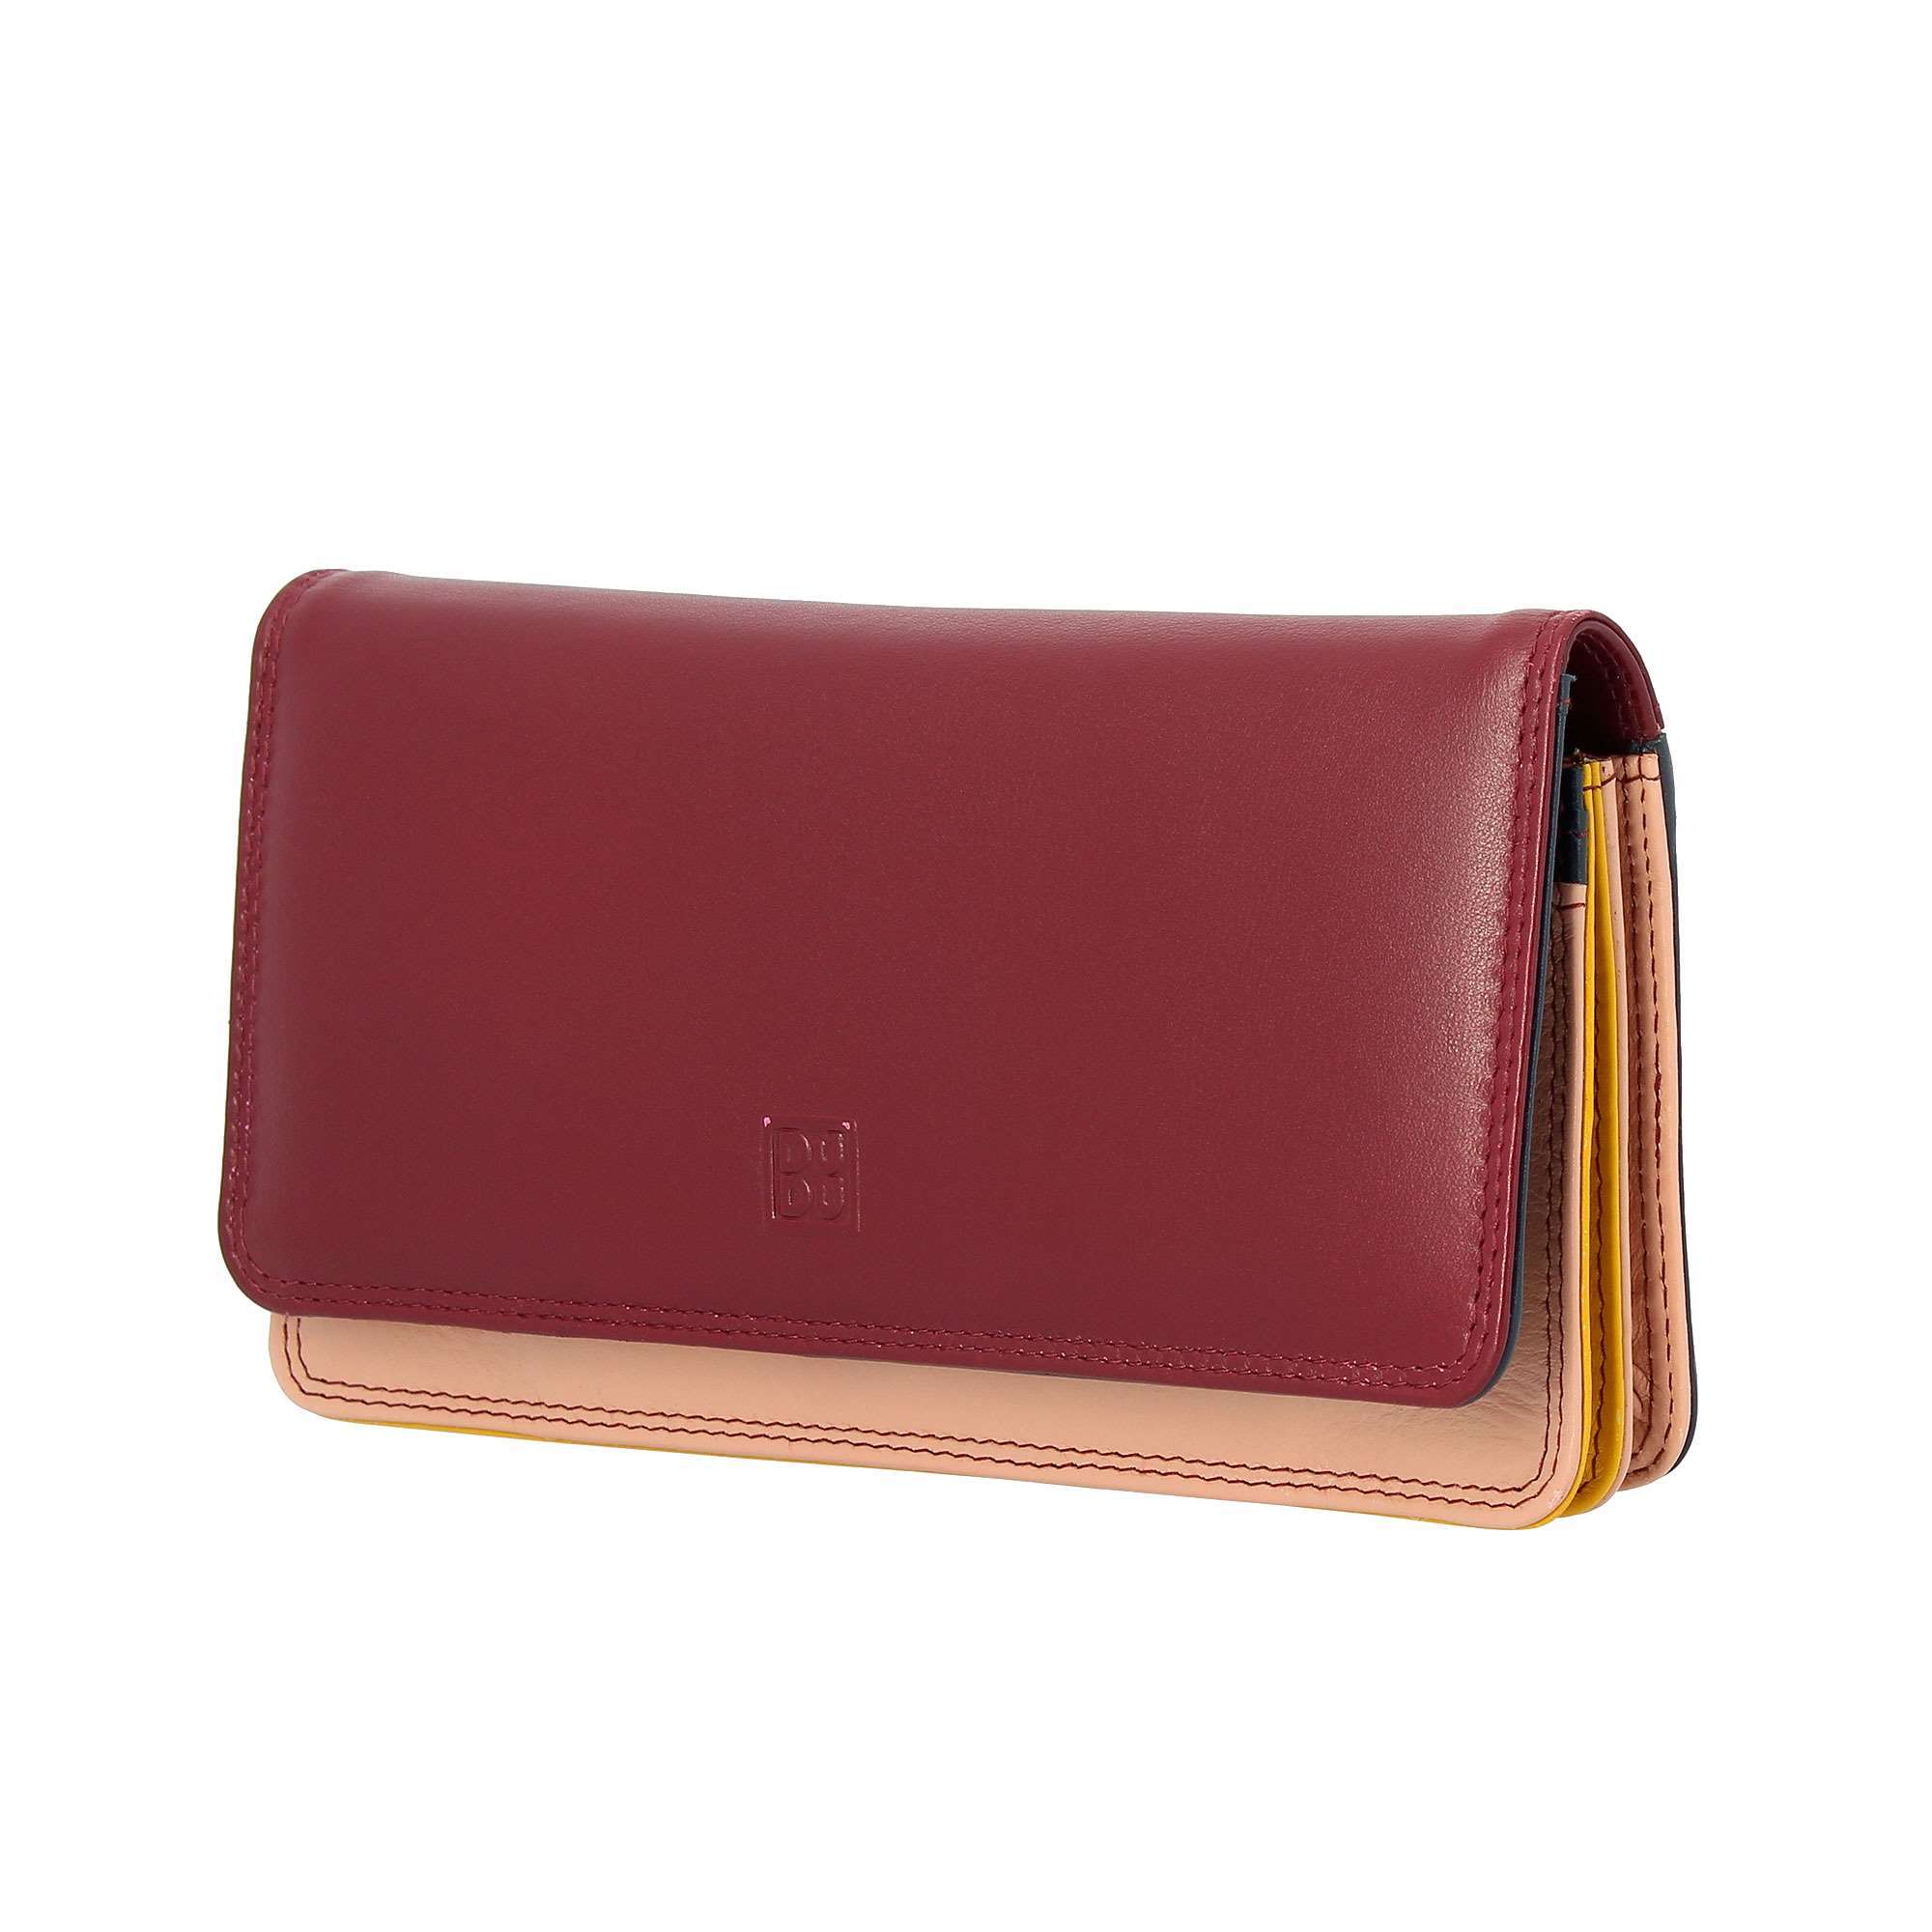 Portefeuille - Colorful - Canarie - Burgundy - Femme